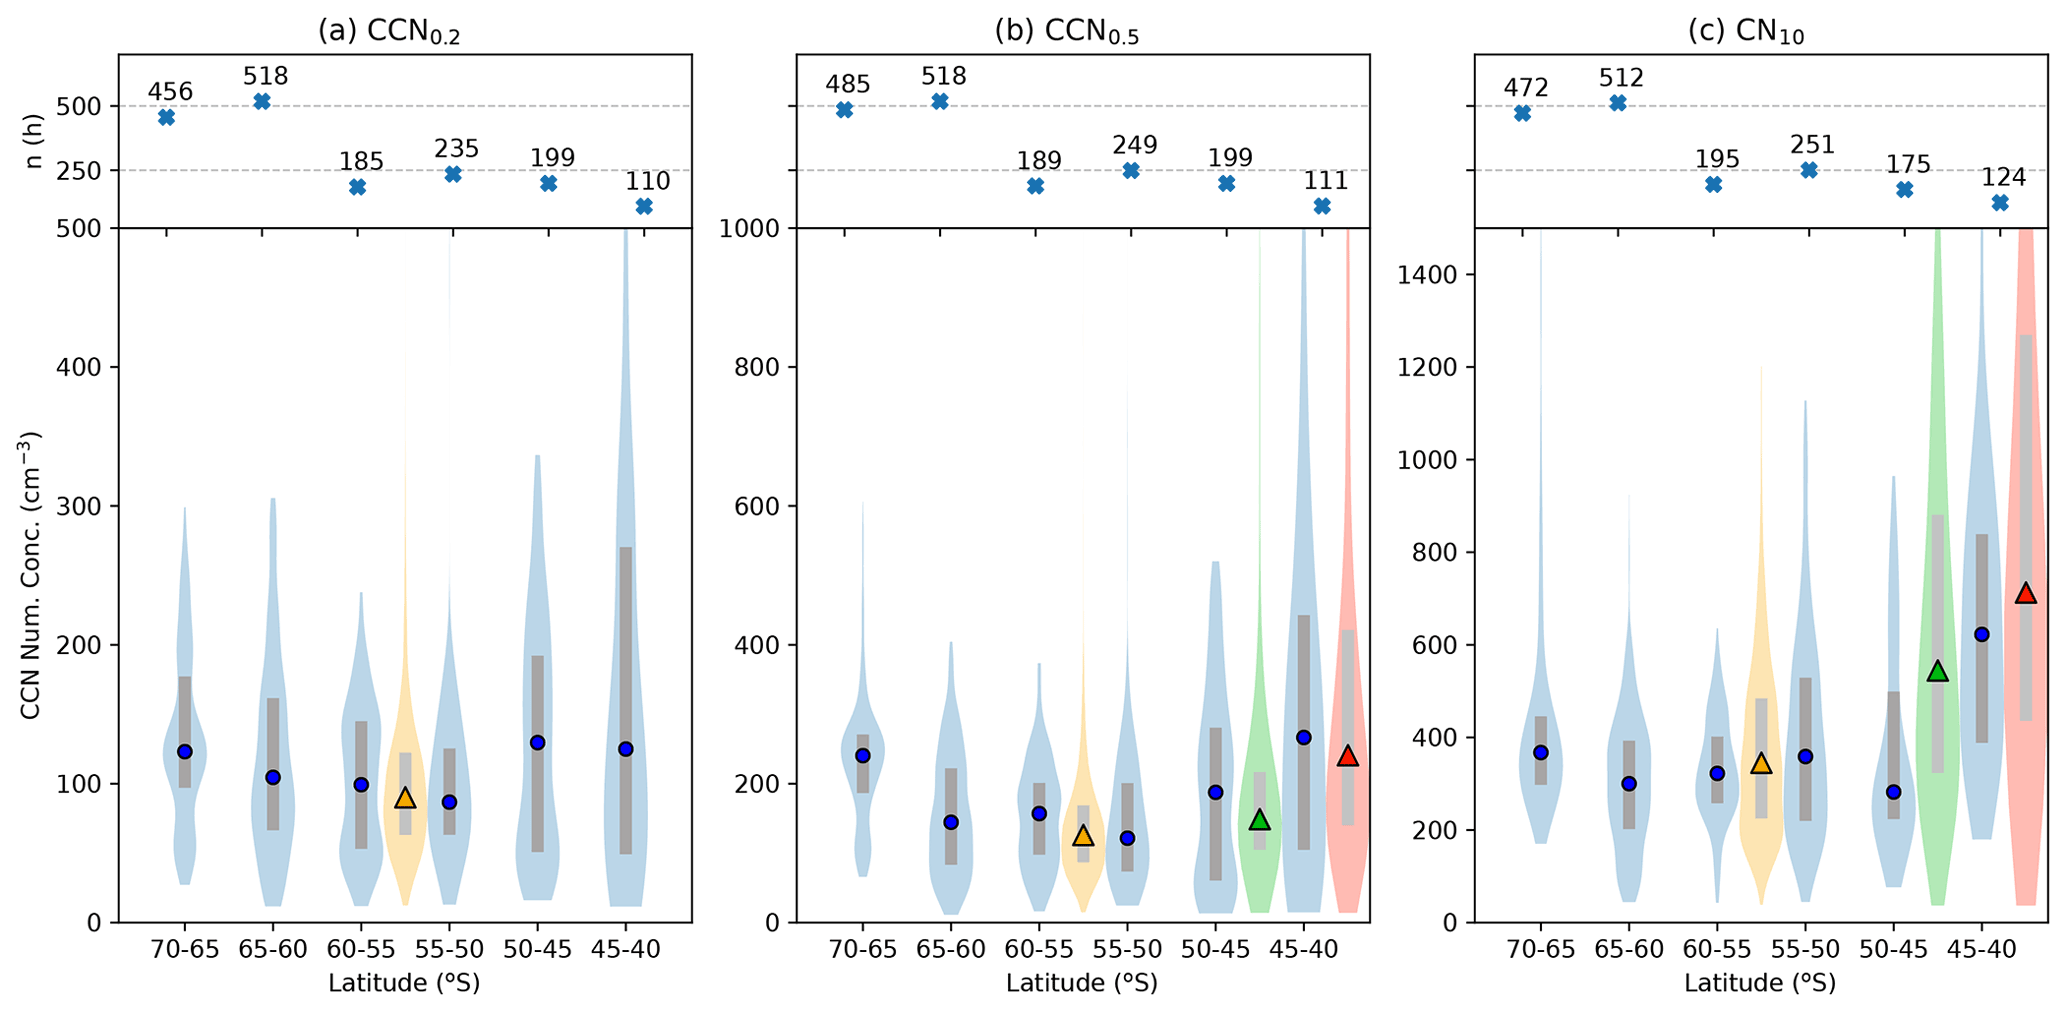 Latitudinal distributions of CCN from various voyages